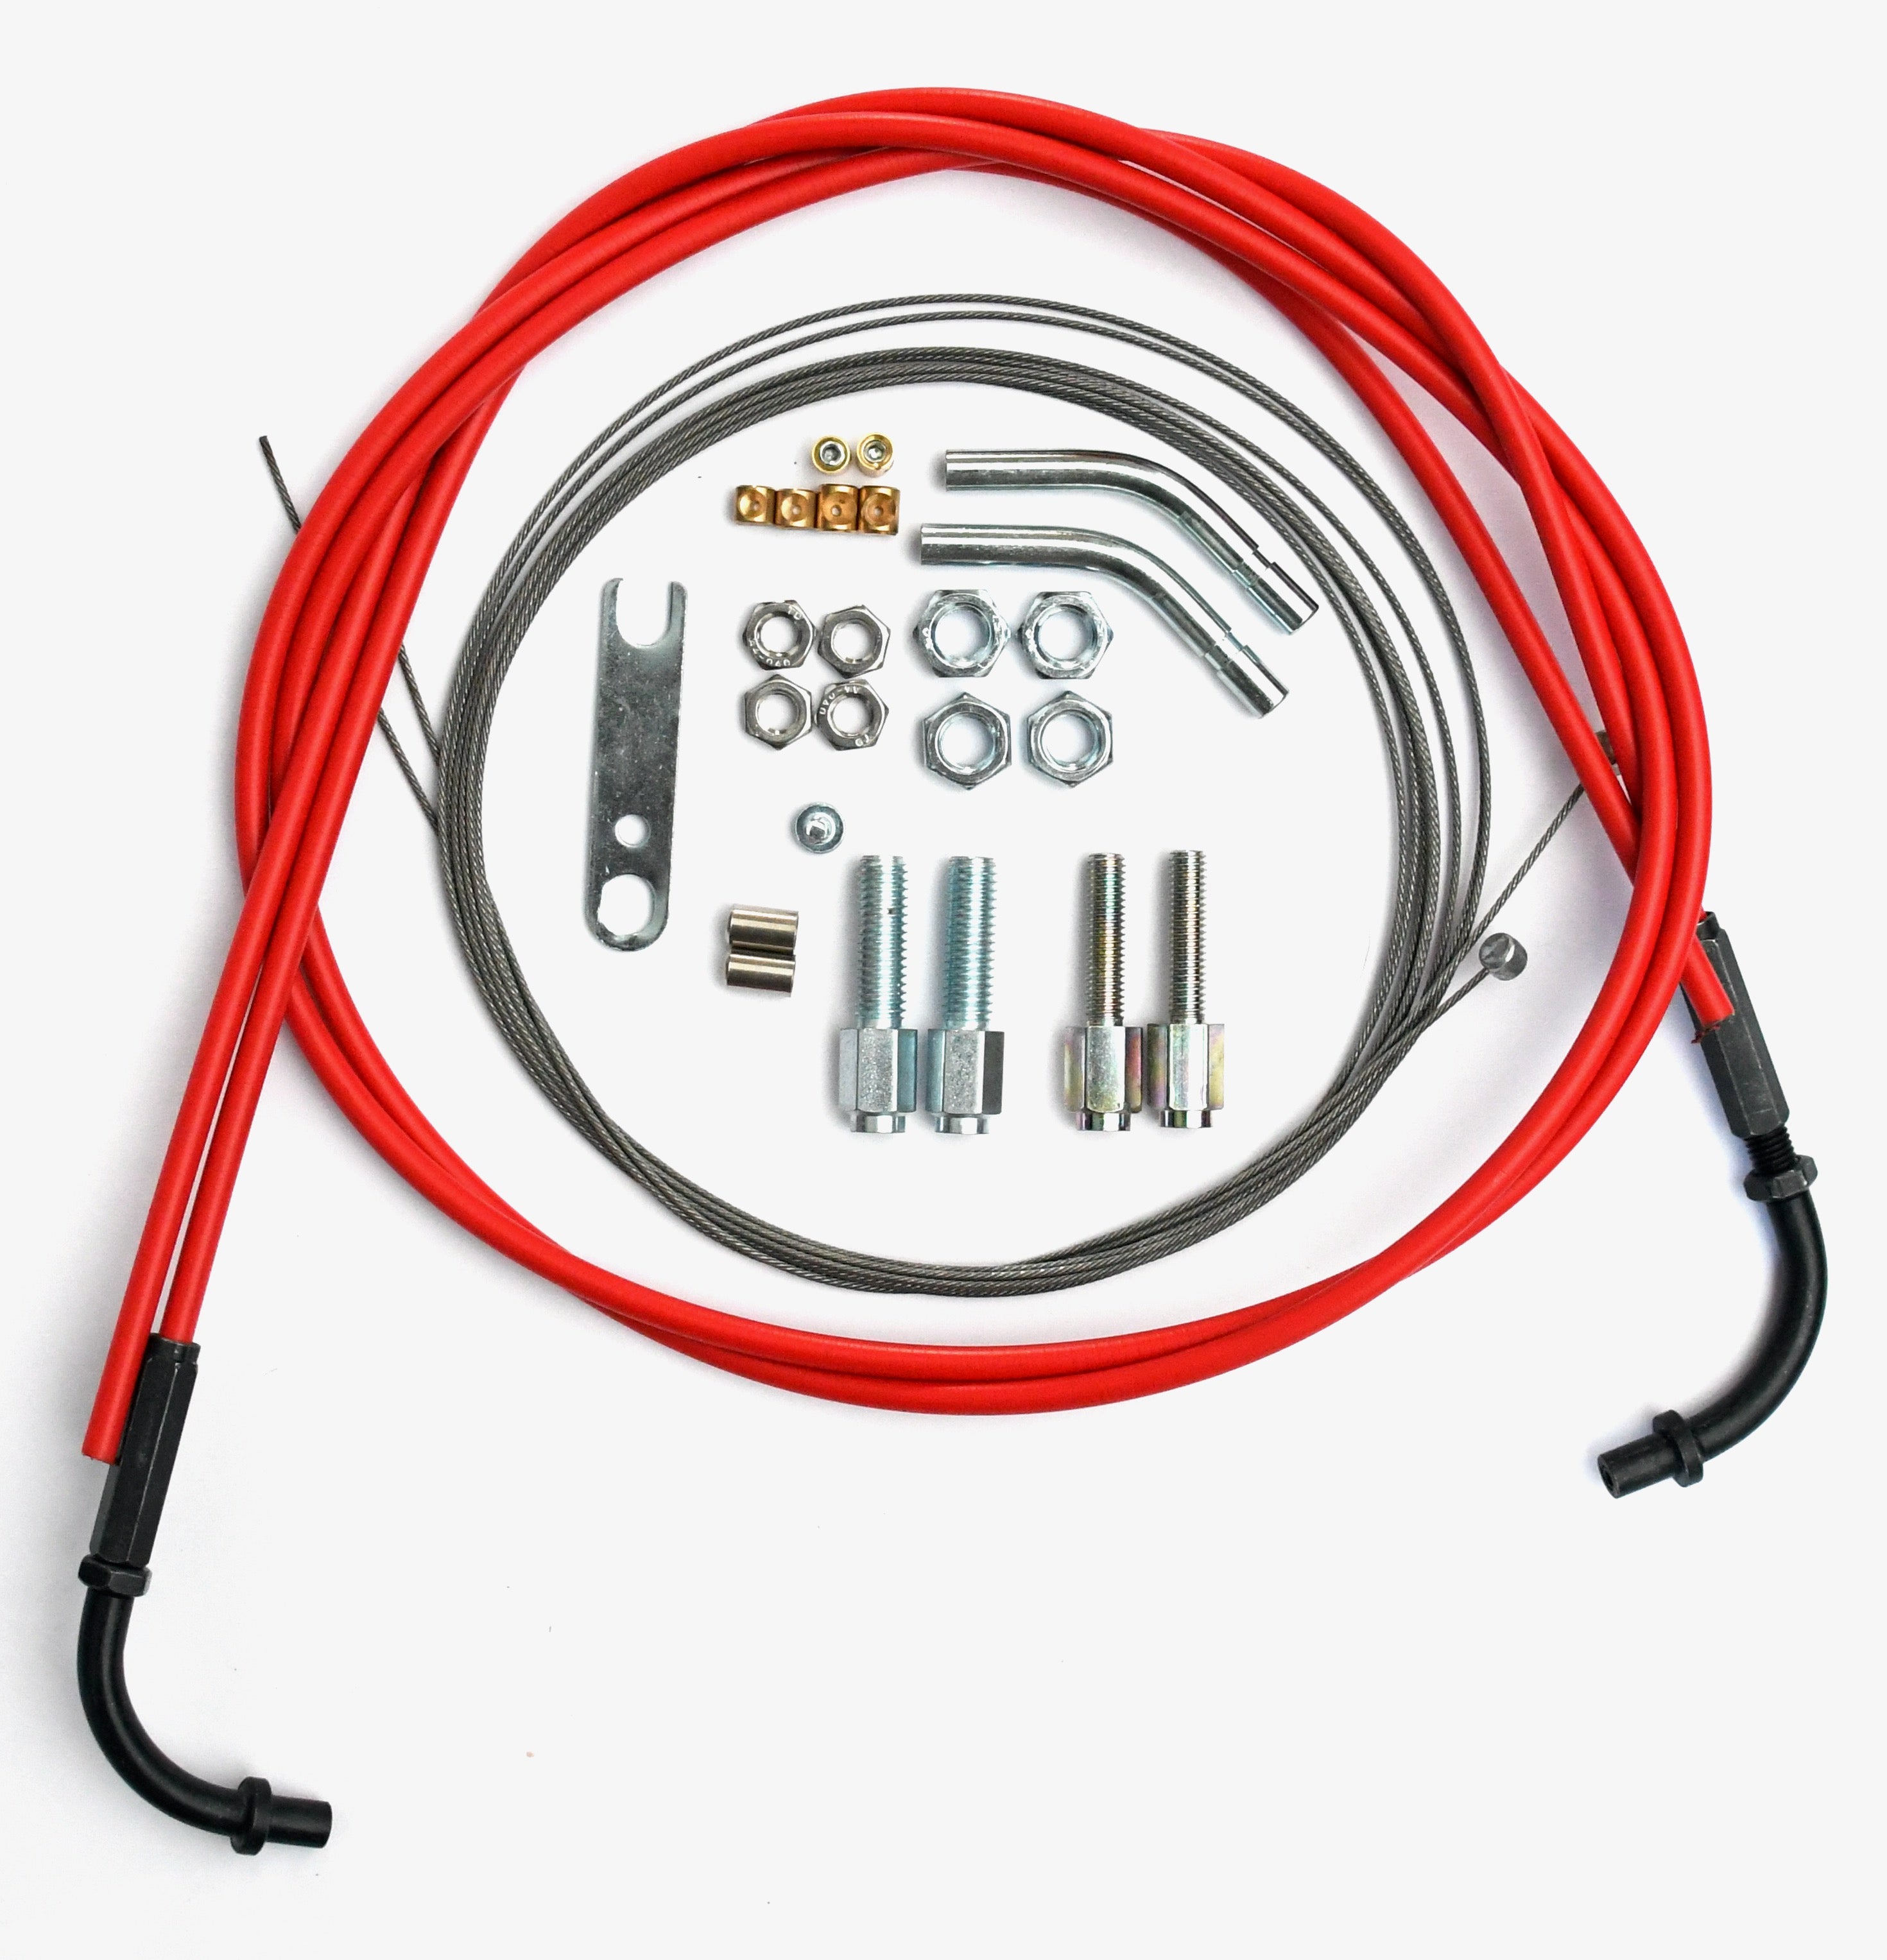 Add an XM2 Throttle Cable Kit and save upto £5